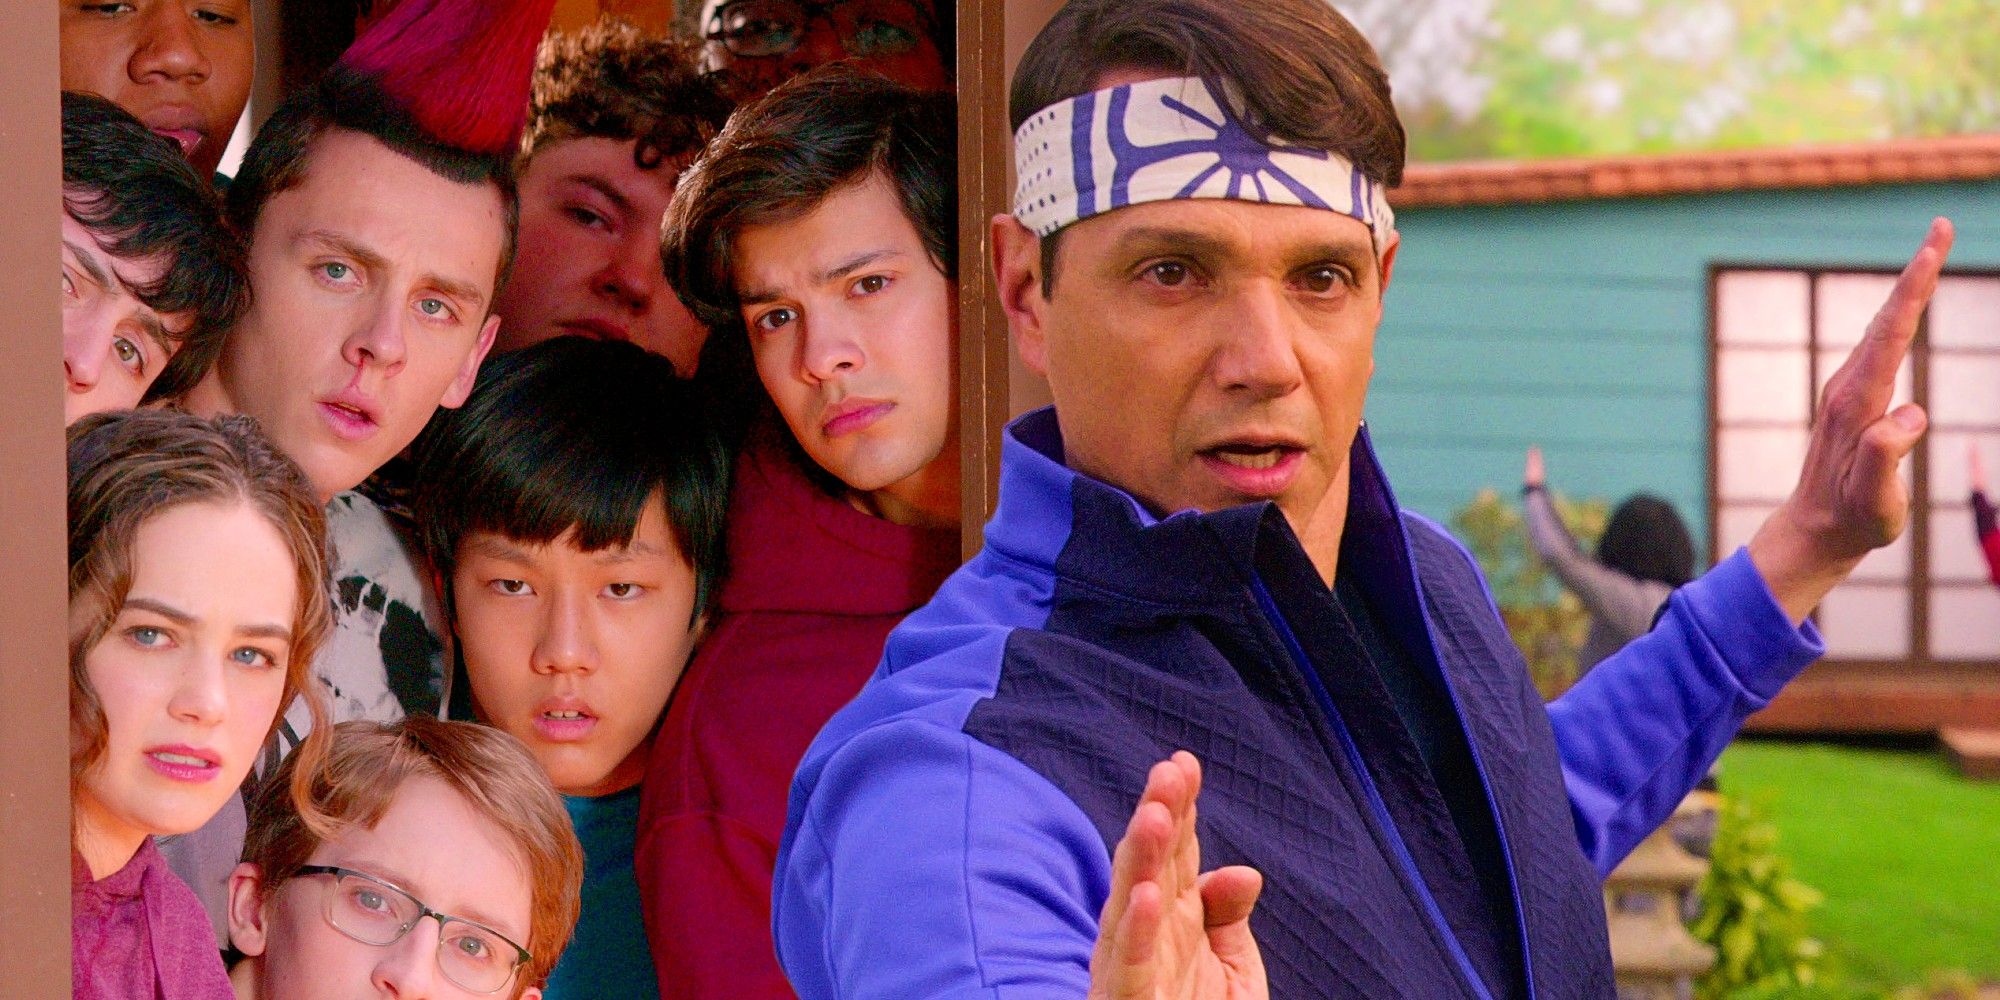 Time Will Cobra Kai Season 4 - Current Updates on Release Date, Cast, and Plot in 2022